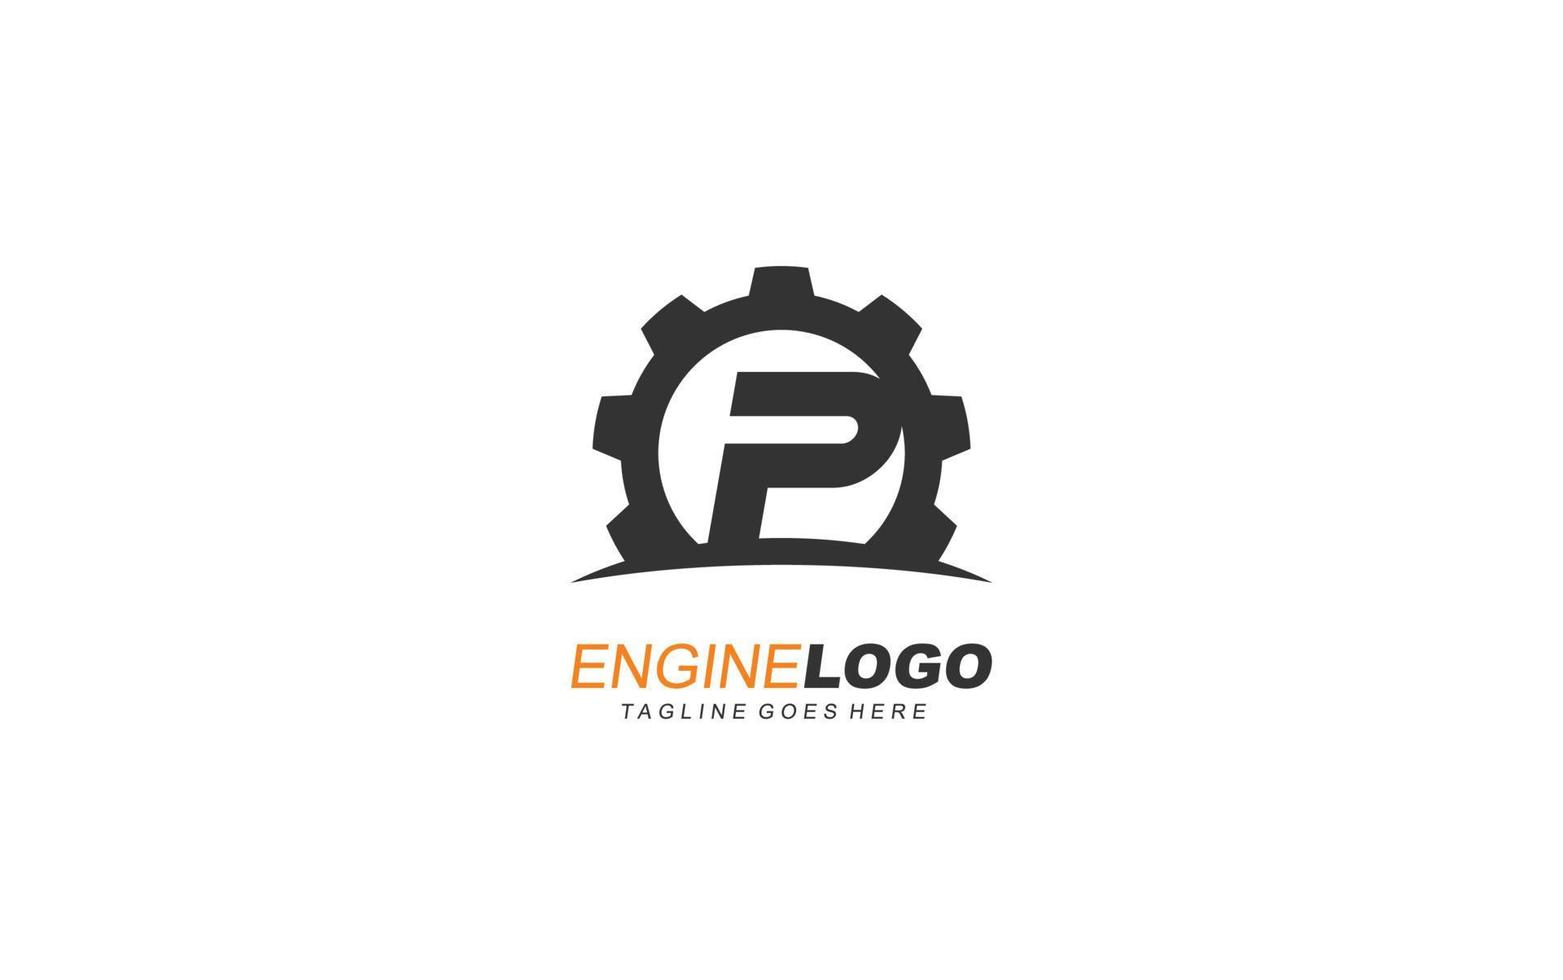 P logo gear for identity. industrial template vector illustration for your brand.